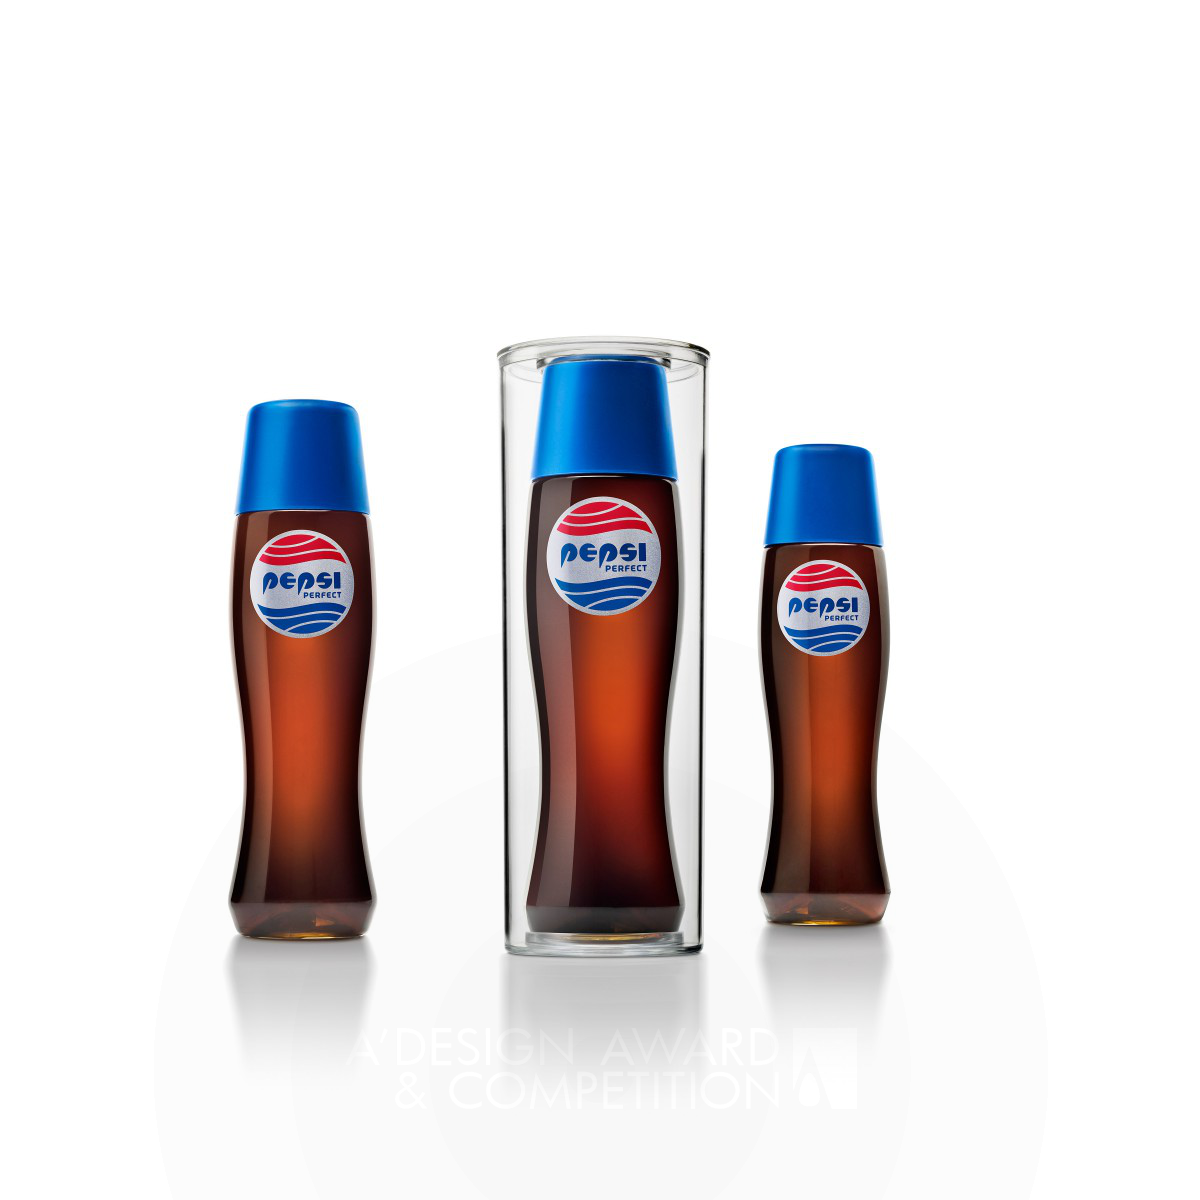 Pepsi Perfect Limited Edition Beverage Bottle by PepsiCo Design and Innovation